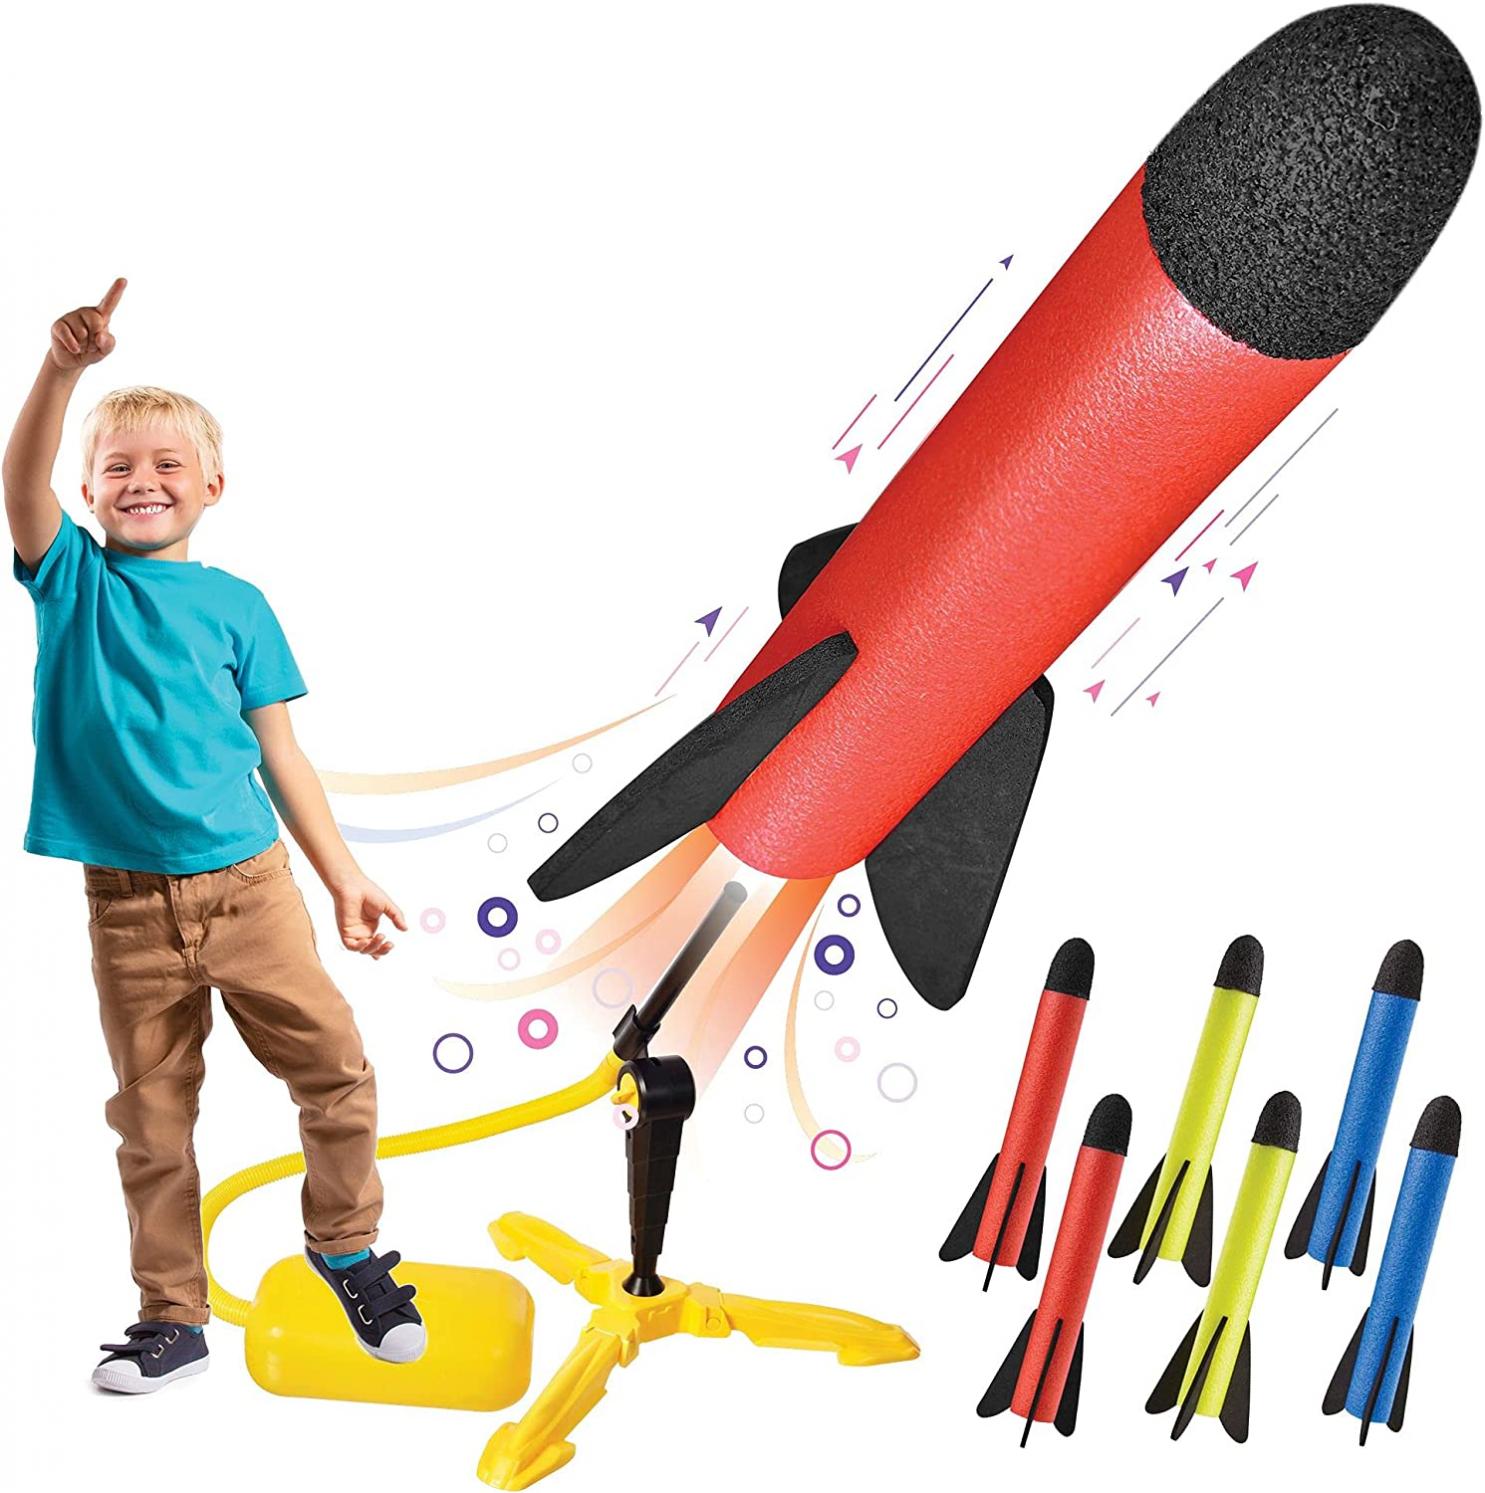 Toy Rocket Launcher for kids – Shoots Up to 100+ Feet – 8 Colorful Foam Rockets, Stomp Launch Pad - Fun Outdoor Toy for Kids - Christmas/Birthday Gifts, Kids Toys for Boys and Girls Age 3+ Years Old